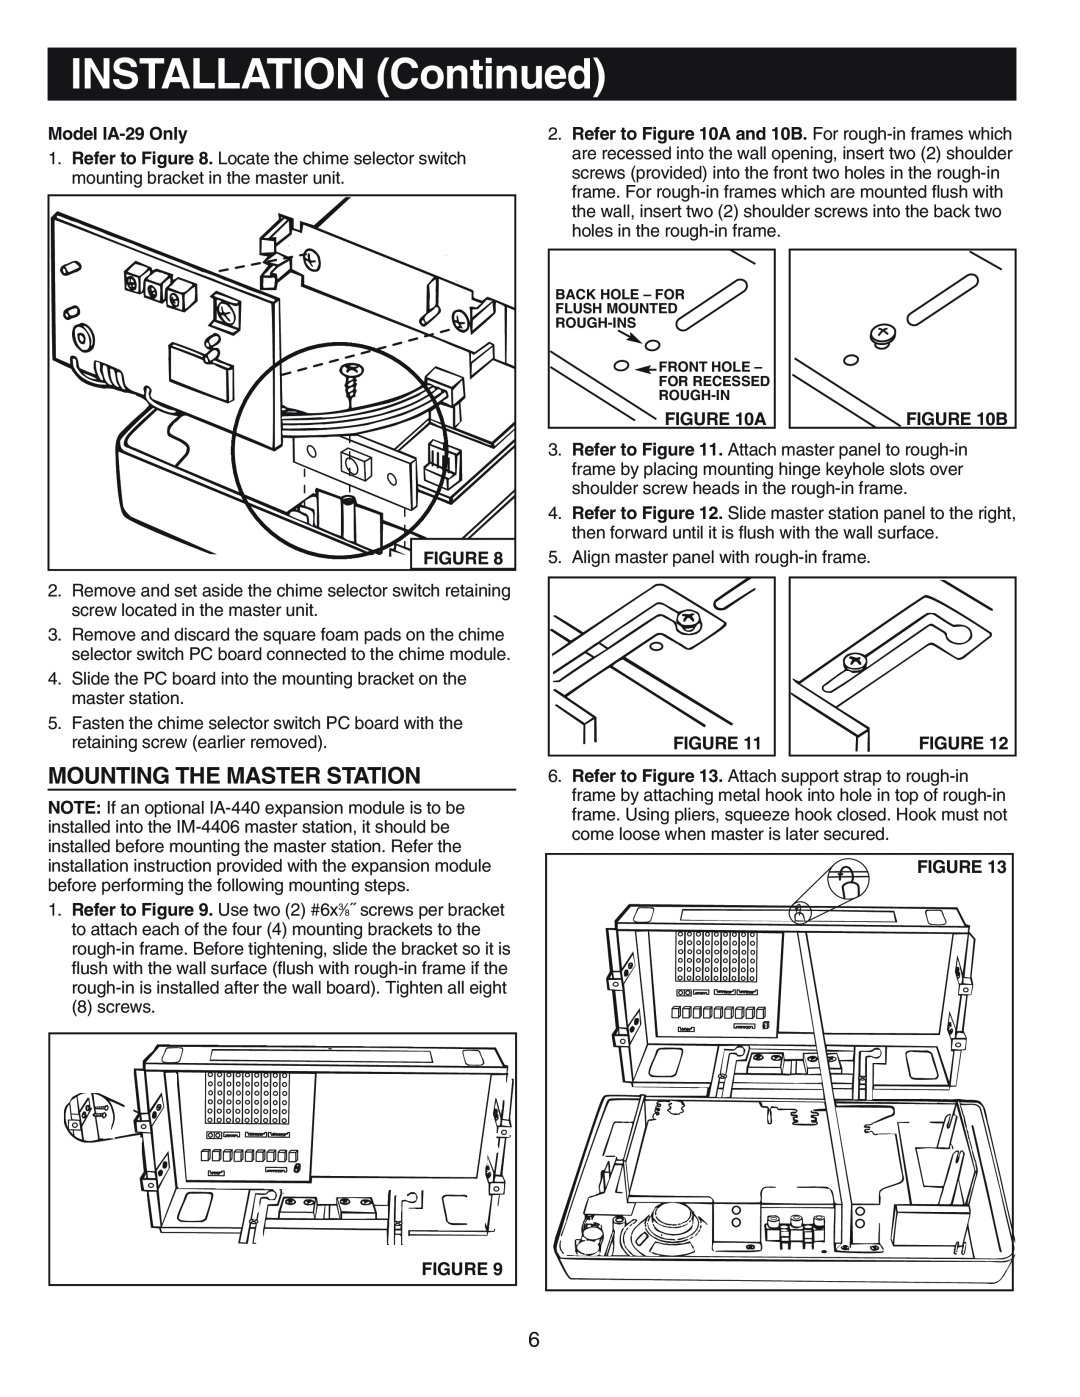 NuTone IM-440 Series installation instructions Mounting The Master Station, INSTALLATION Continued, Model IA-29Only, B 